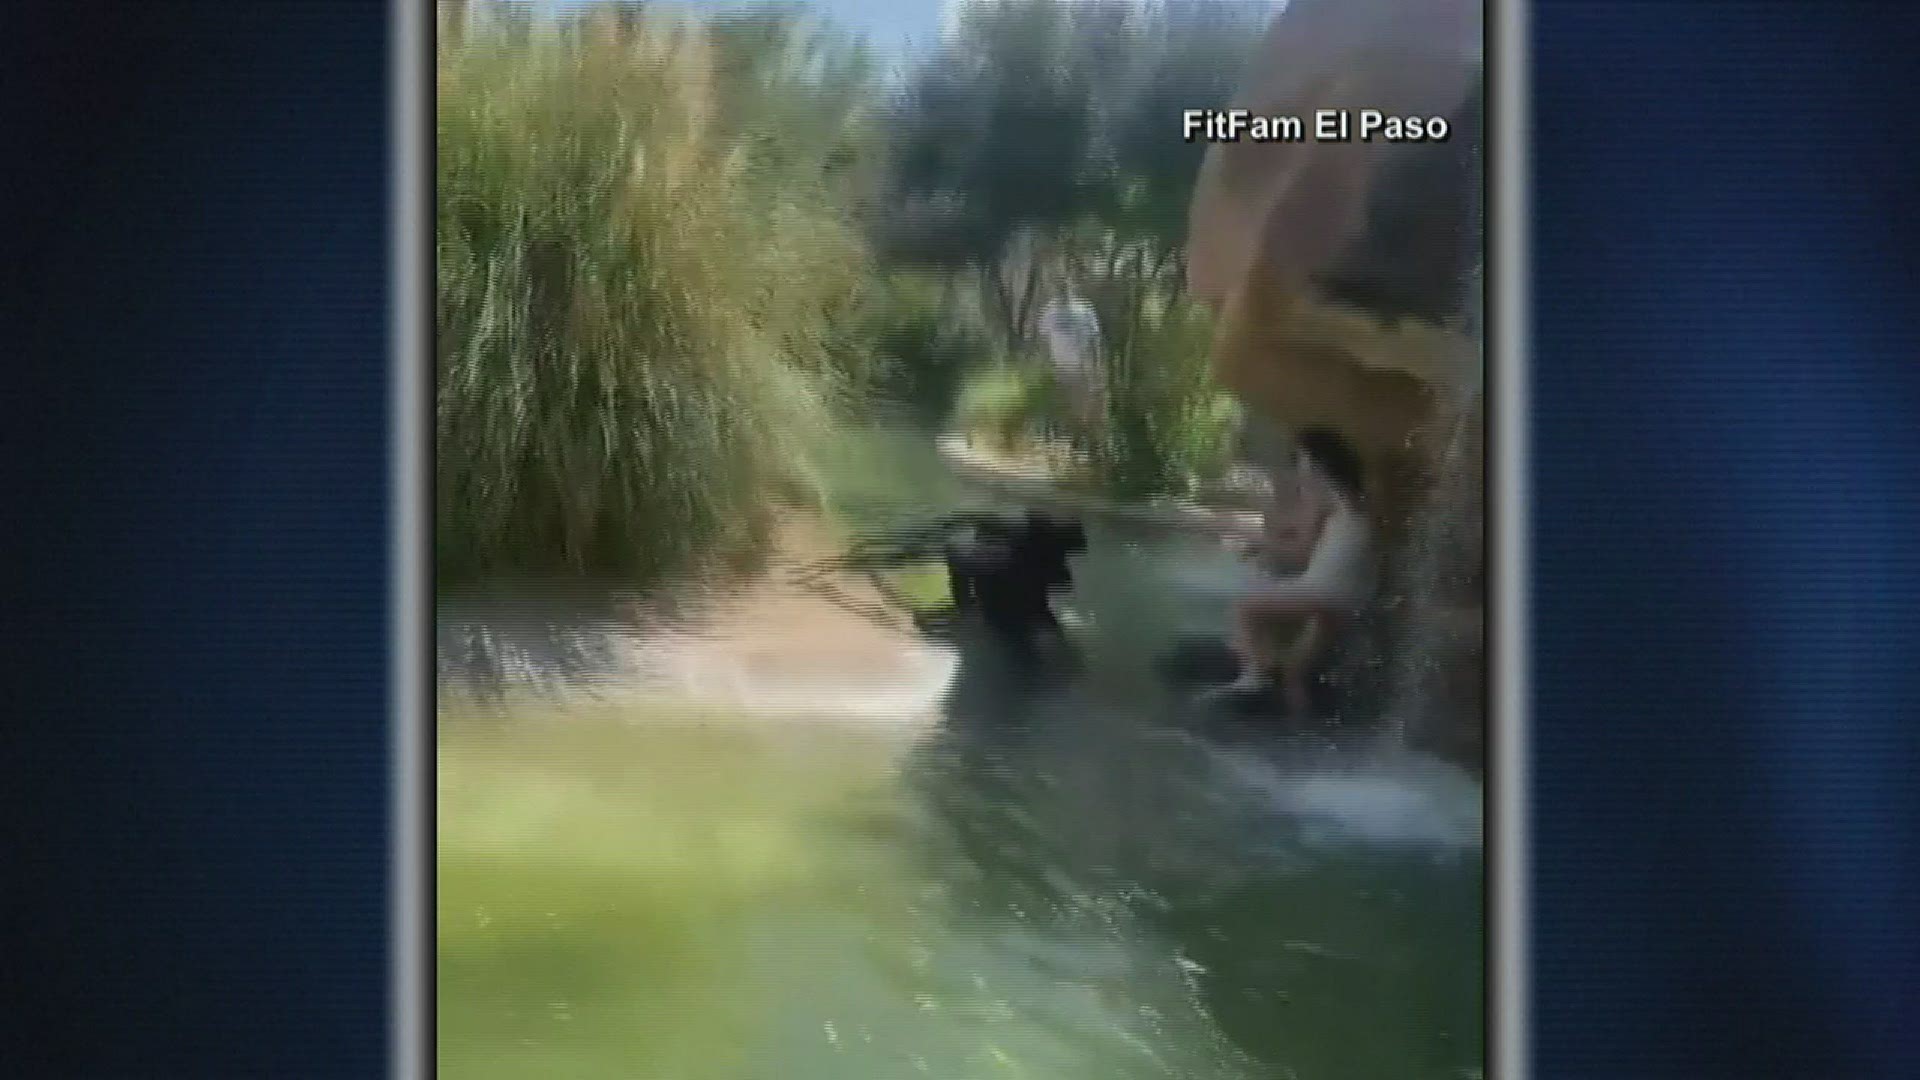 A woman caught monkeying around on camera at a Texas zoo lost her job and she could face criminal charges.